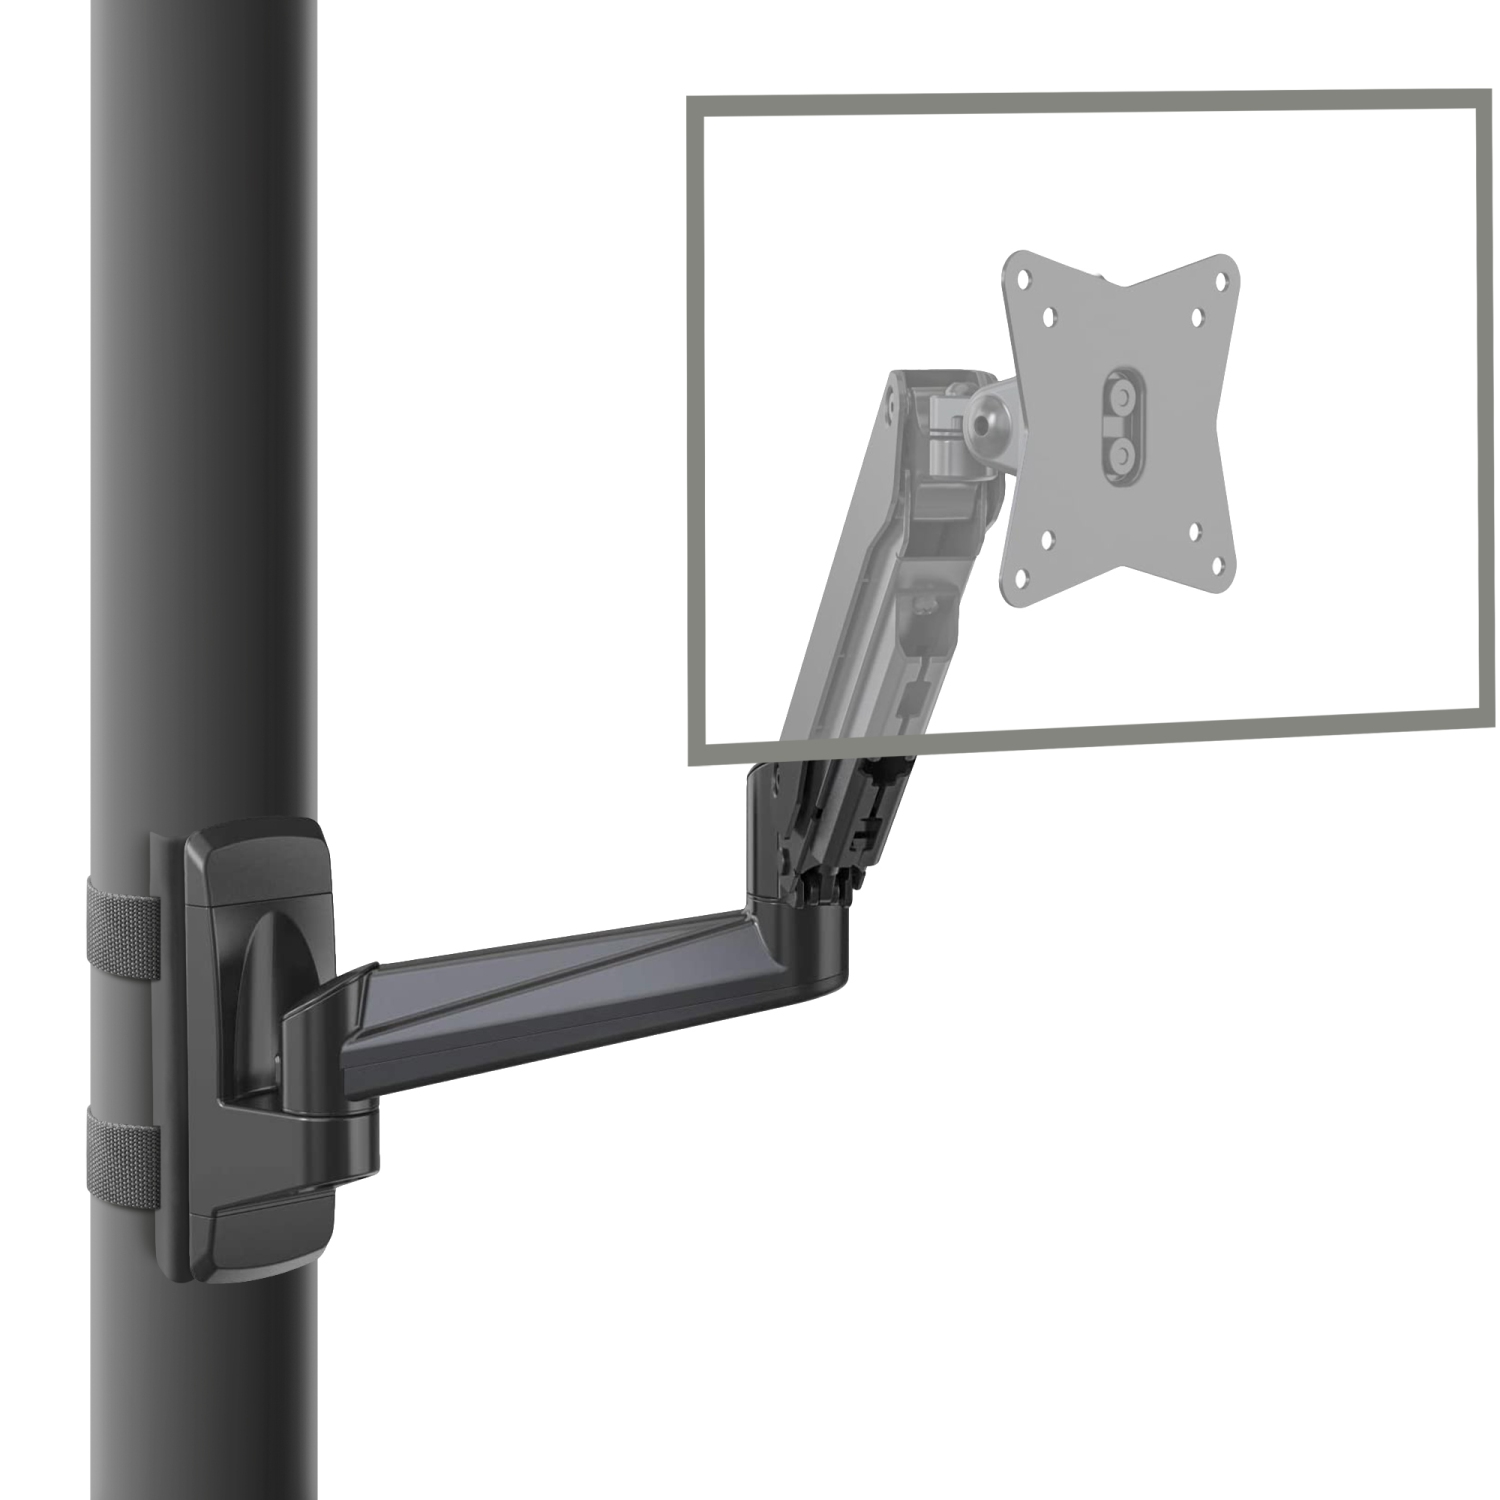 CondoMounts NO Drill Full Motion Pillar Monitor Mount | WorkBench Monitor Mount | Pallet Rack | GAS Spring Arm with VESA Plate | Holds 18lbs | Up to 32" Monitor | Black